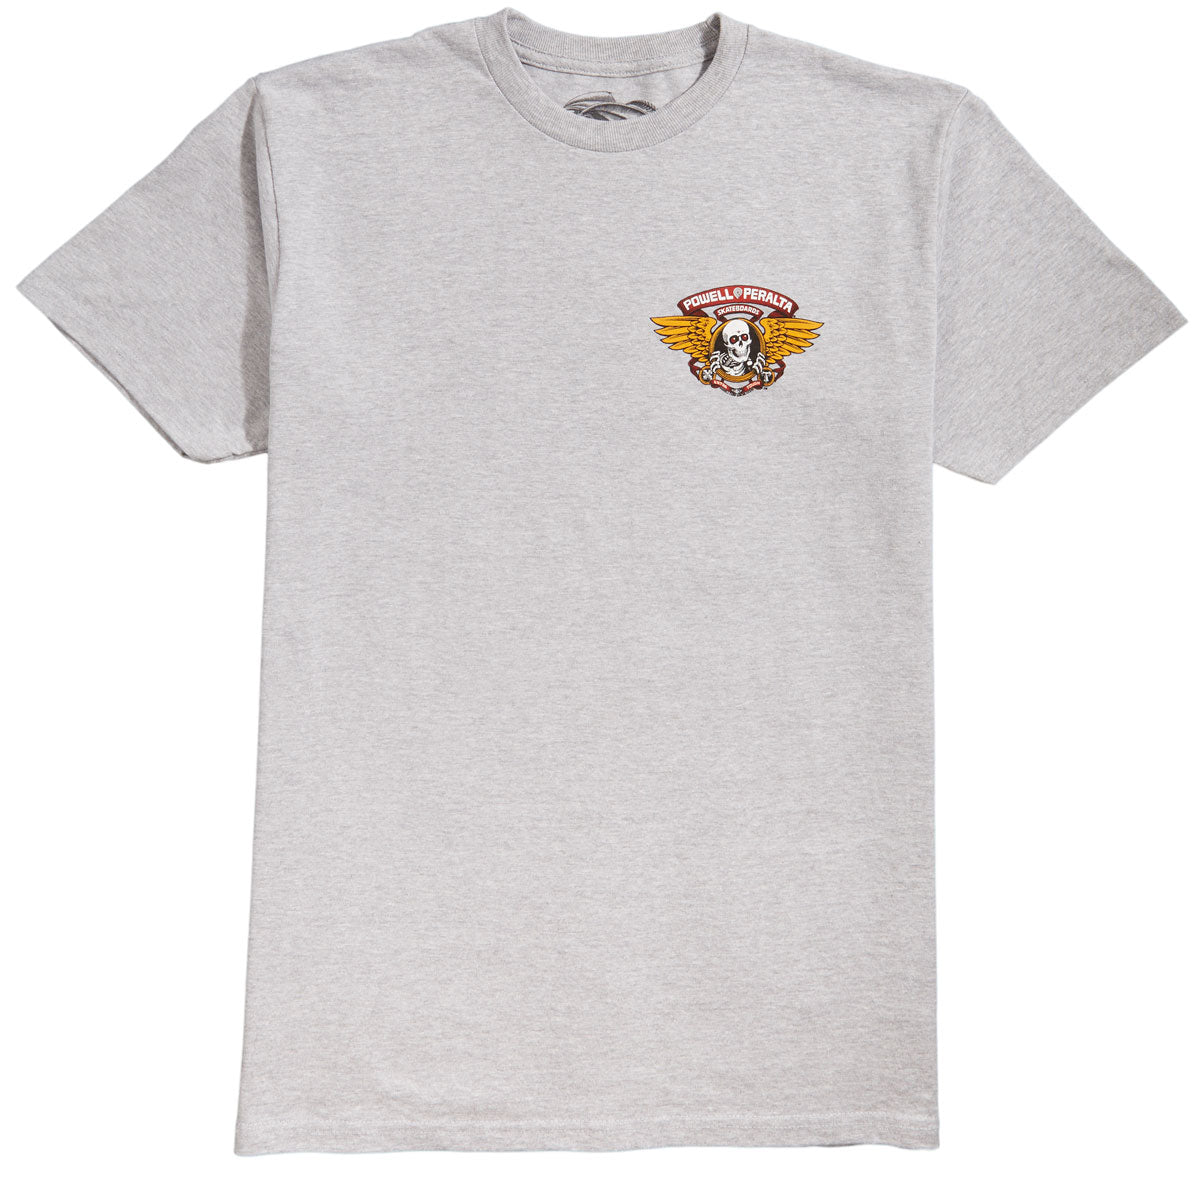 Powell-Peralta Winged Ripper T-Shirt - Athletic Heather image 2